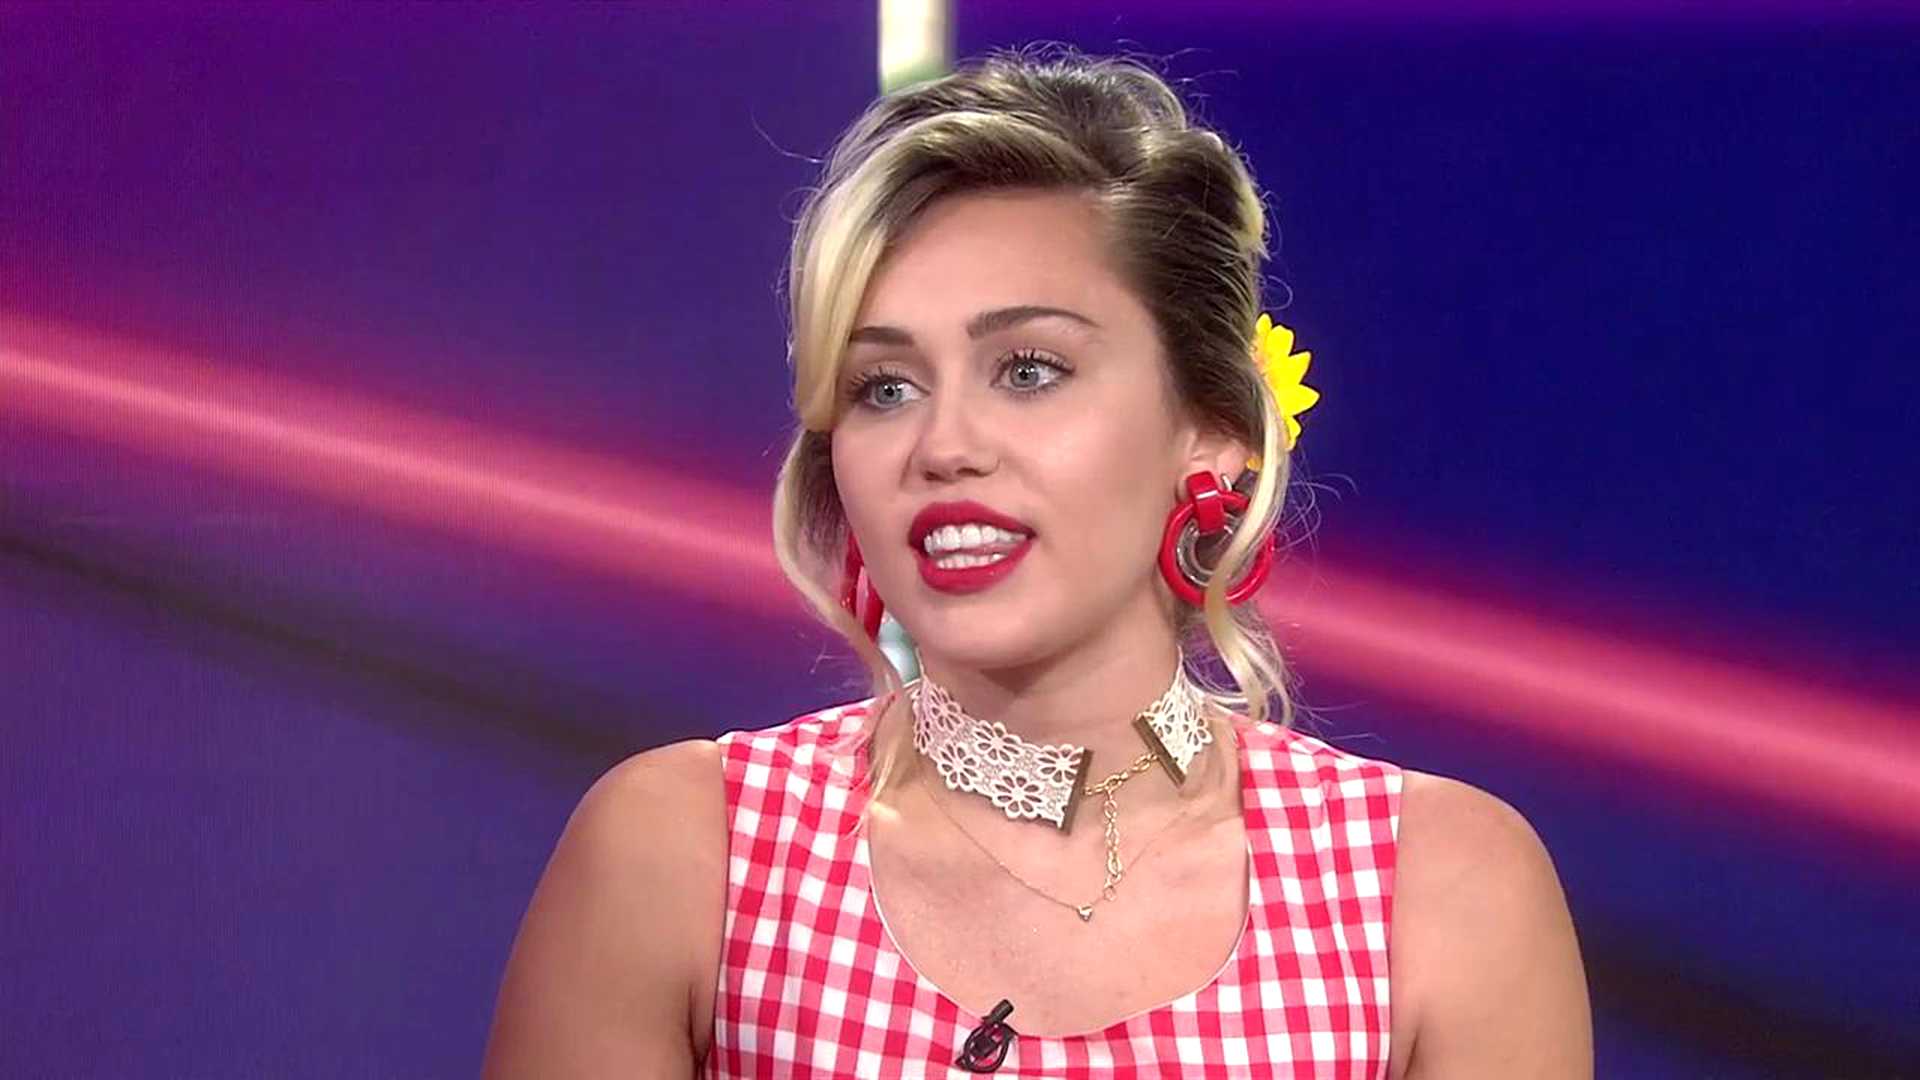 Miley-Cyrus-Is-Officially-Ditching-Her-Iconic-Blonde-Hair-–-Teases-a-New-Look